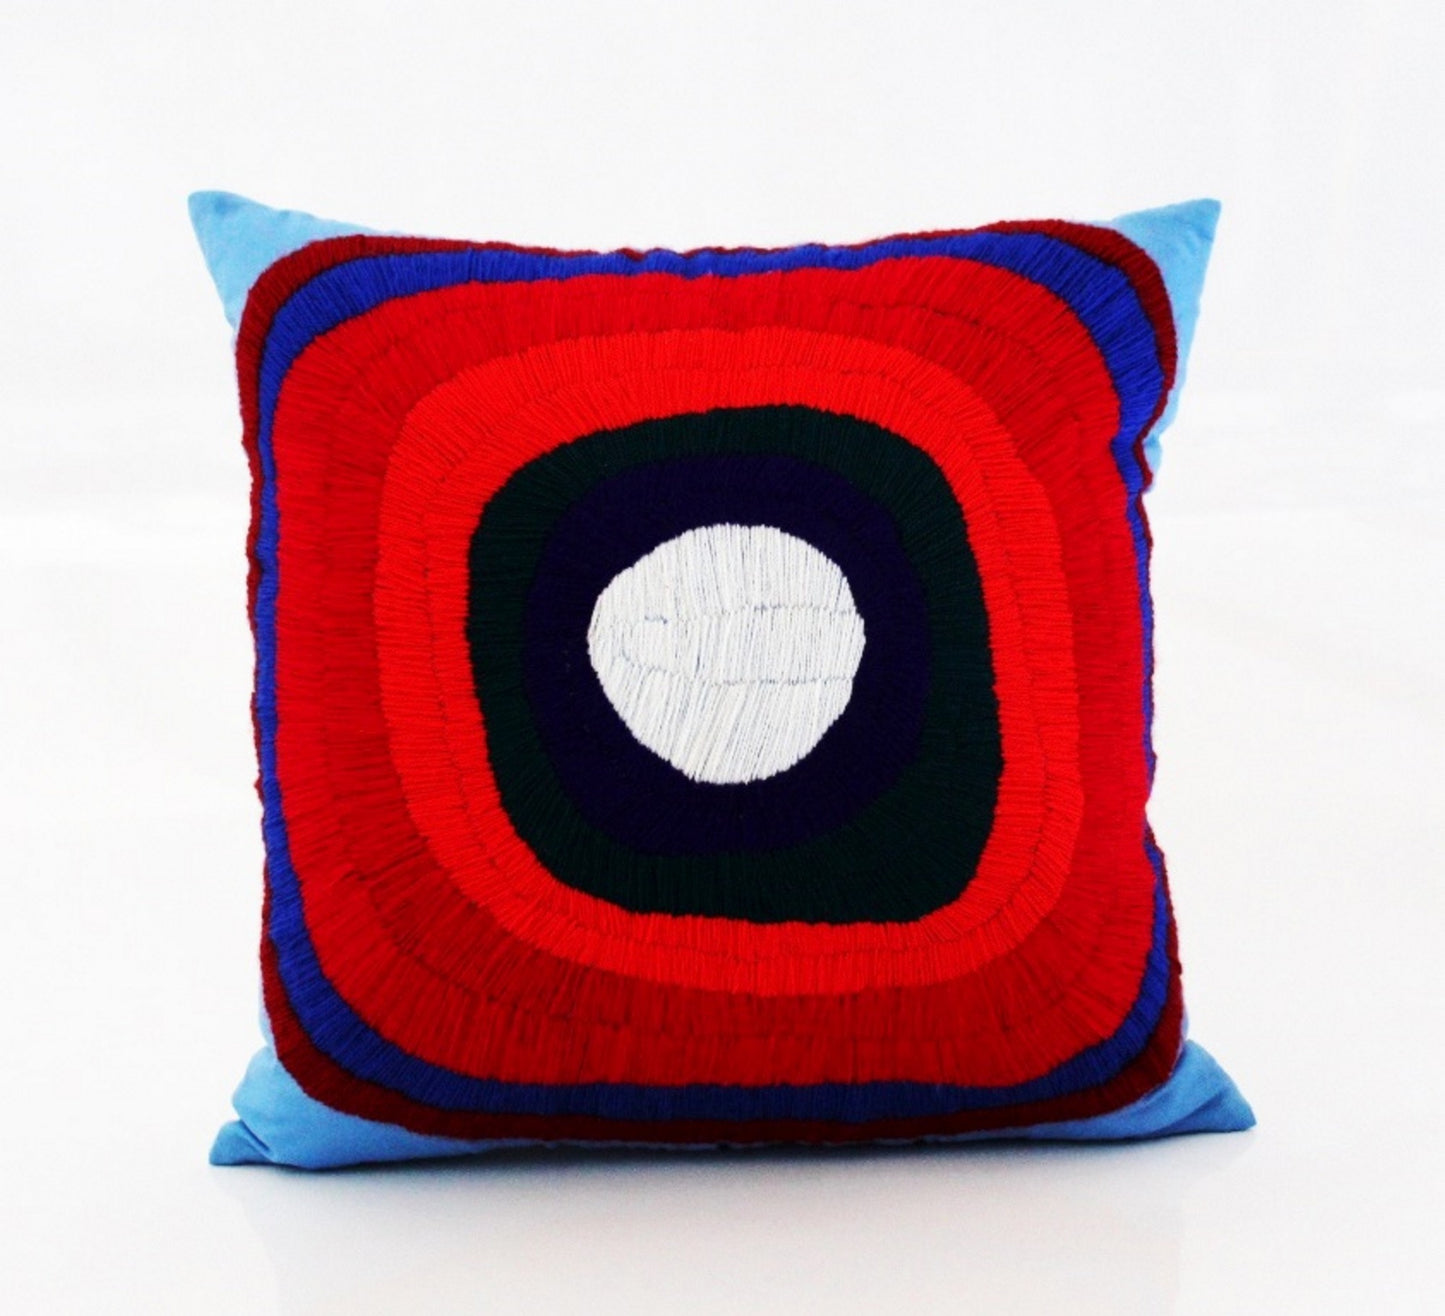 Embroidered pillow cover 16"x16" - Circles RED